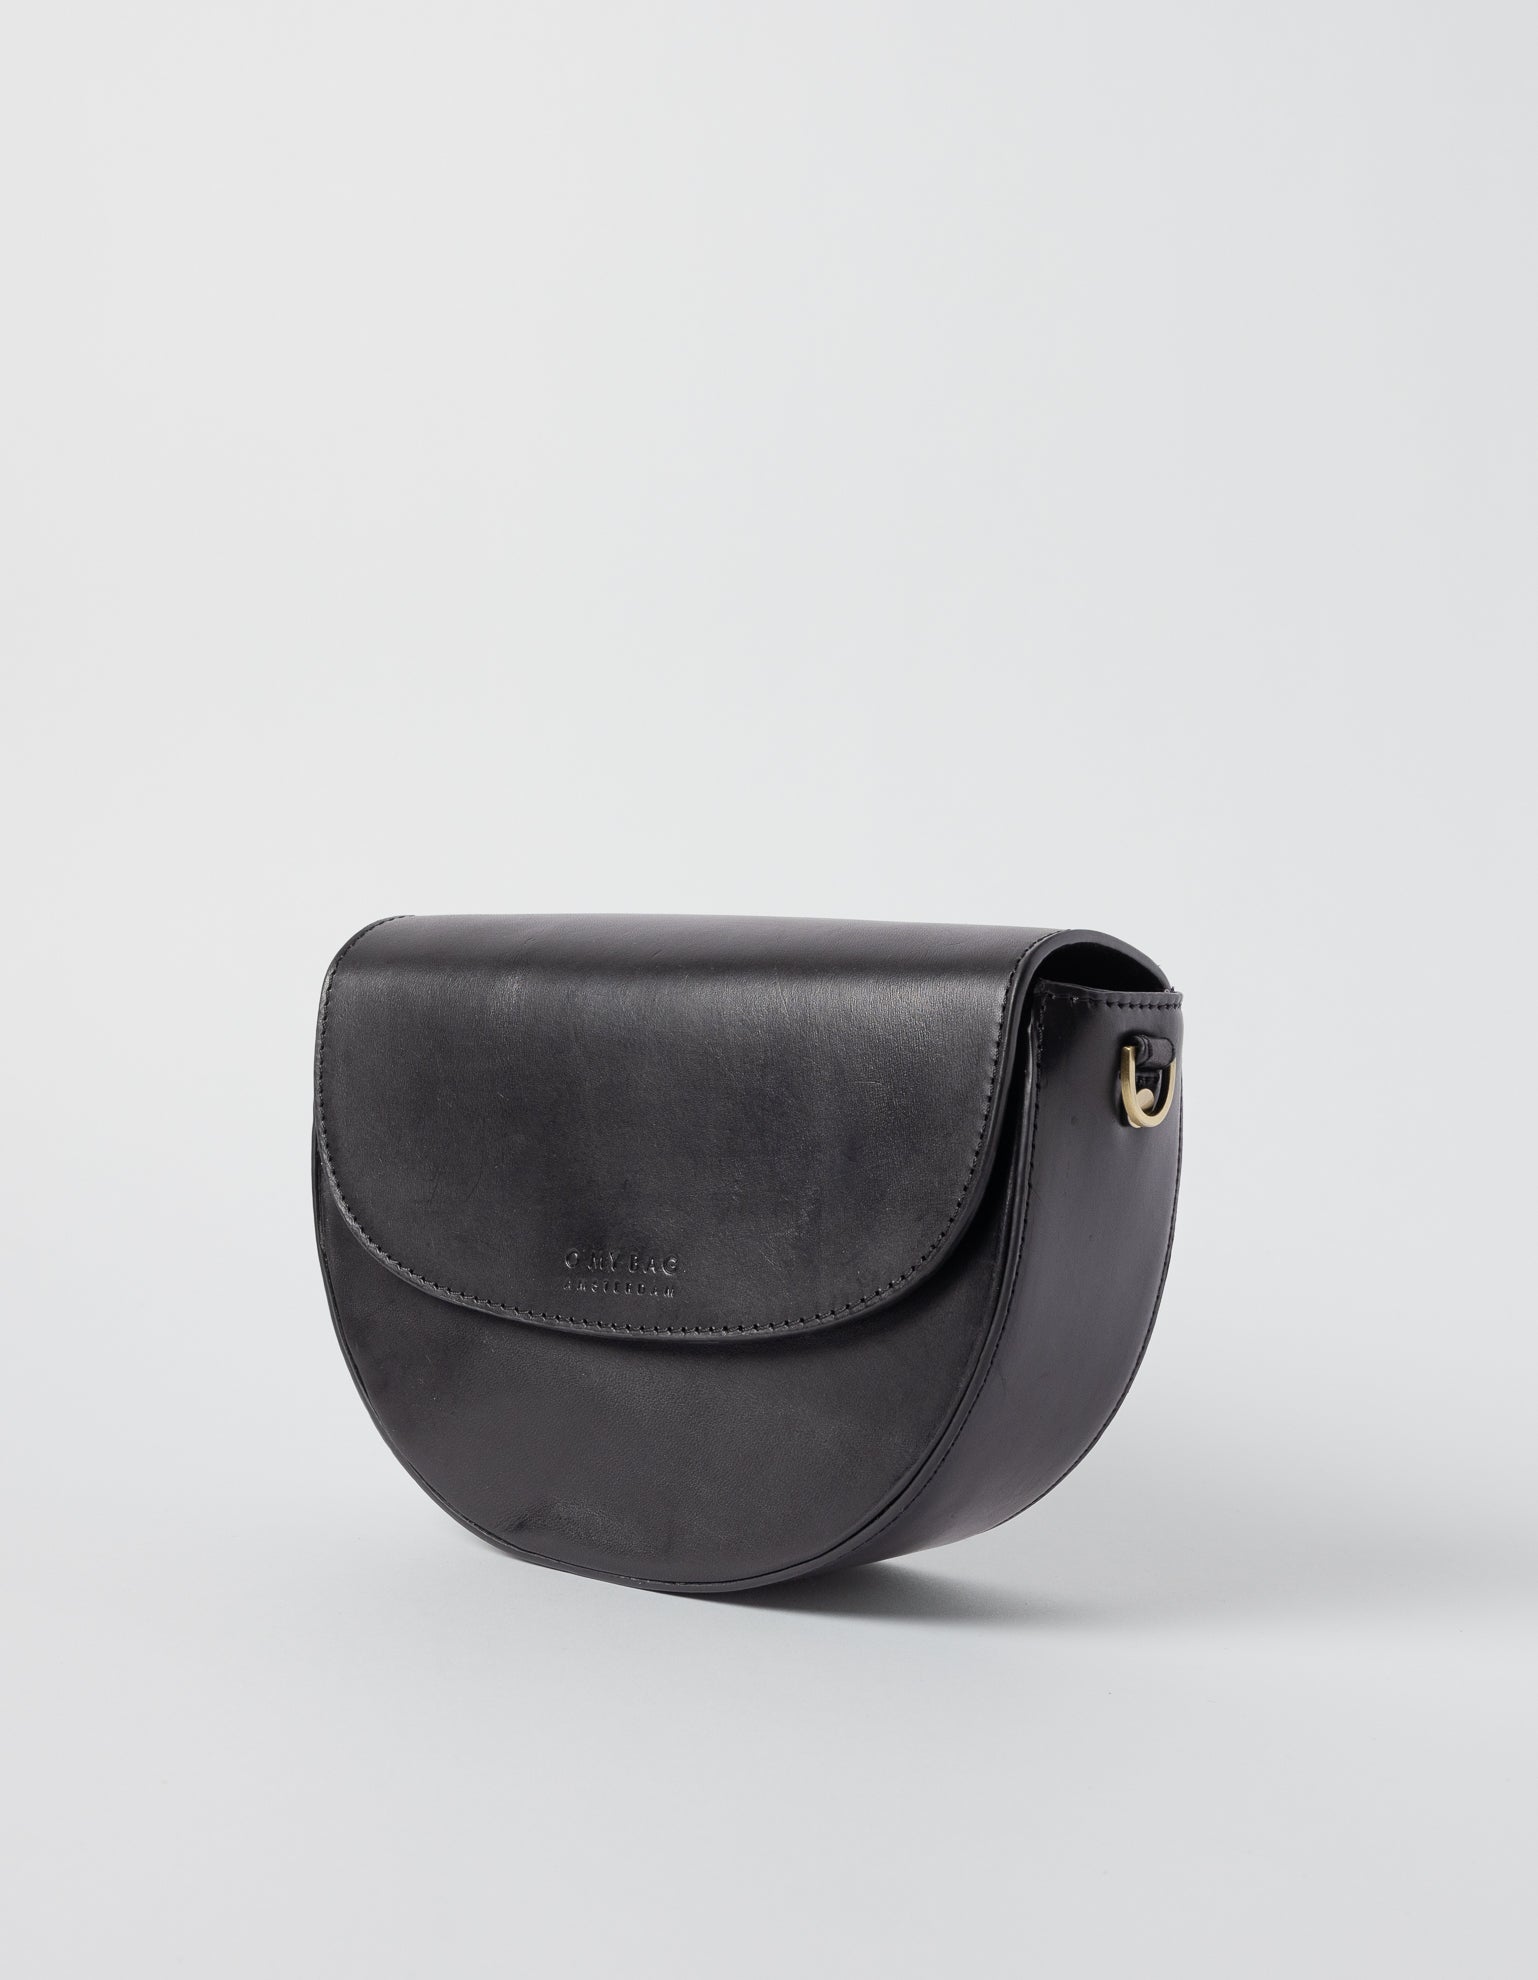 Perfectly Imperfect Ava - Black Classic Leather